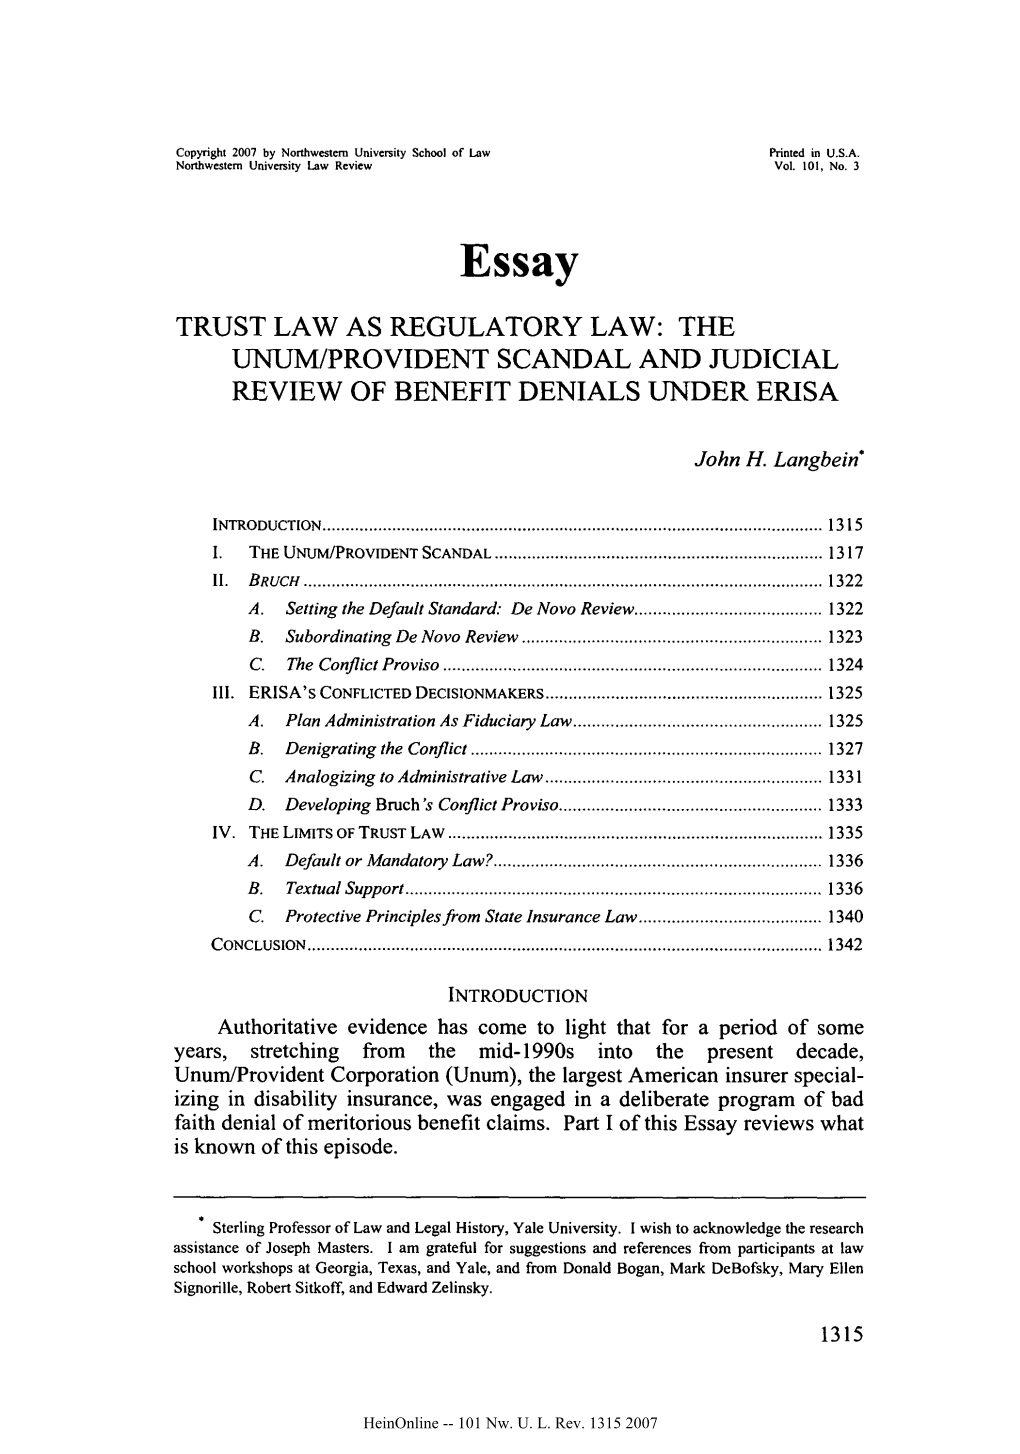 Trust Law As Regulatory Law: the Unum/Provident Scandal and Judicial Review of Benefit Denials Under Erisa